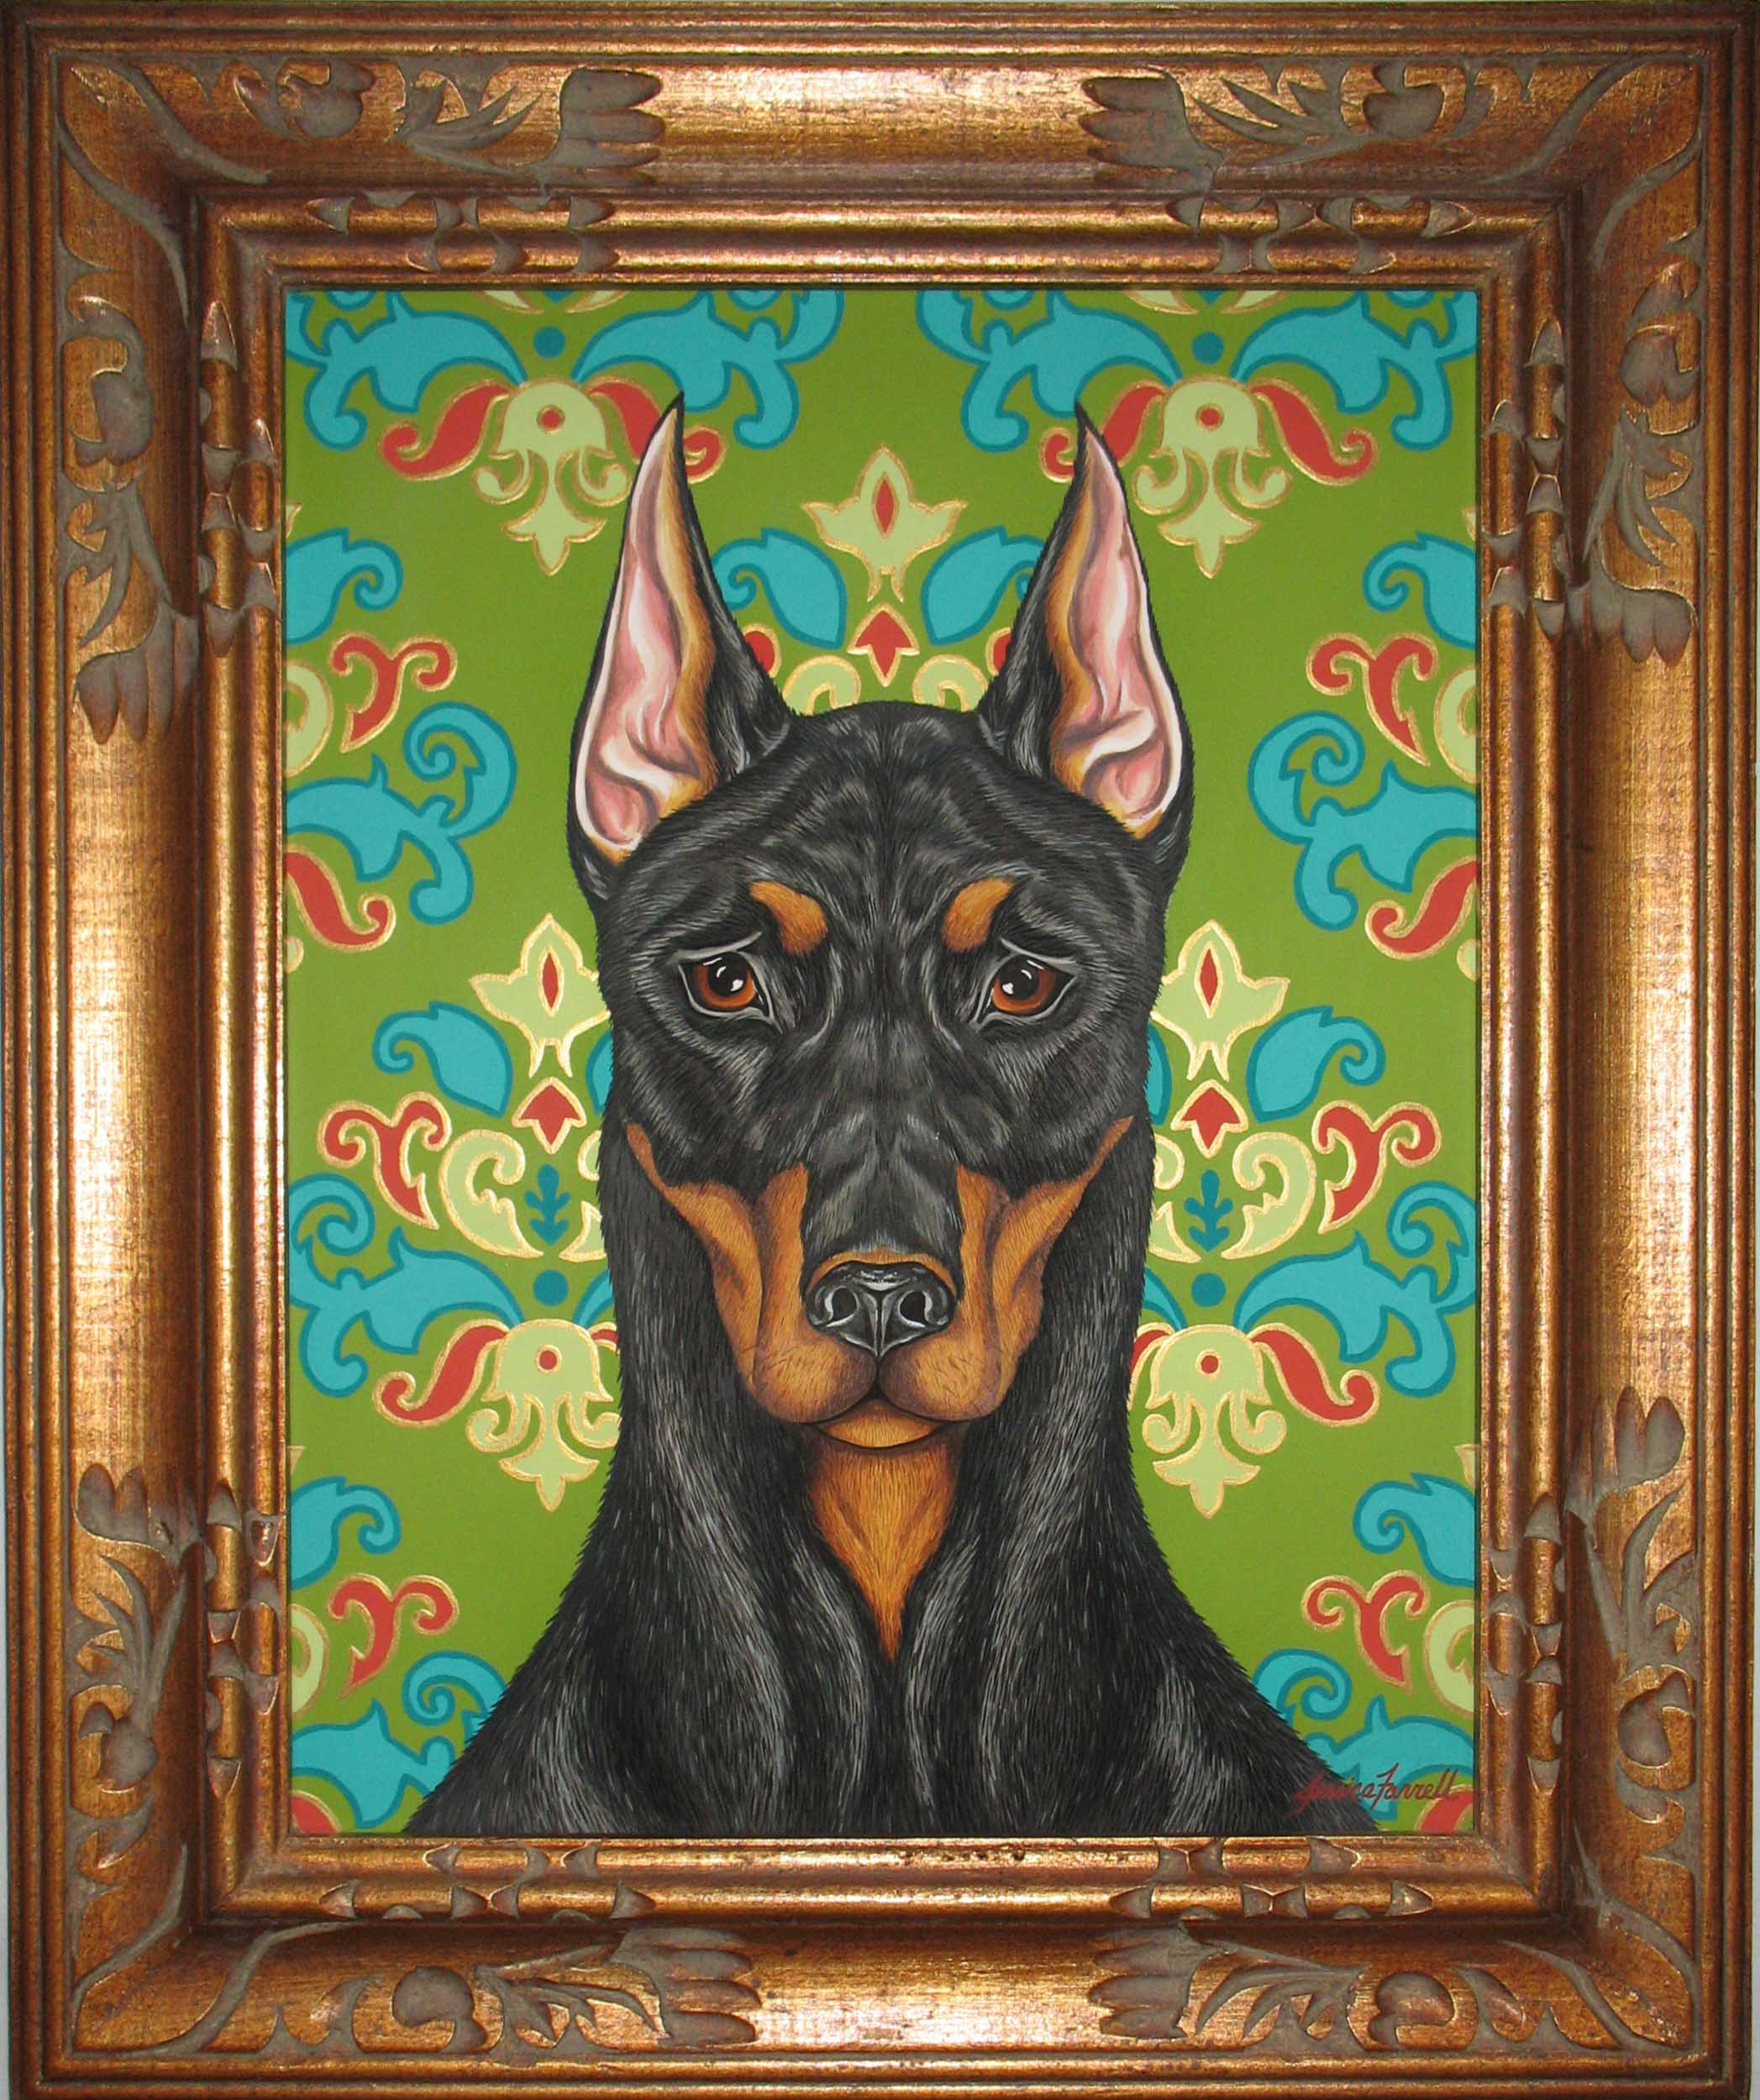   Doberman Pinscher,  Acrylic on wood with vintage frame, 25 x 21 inches (framed)  (private collection) 